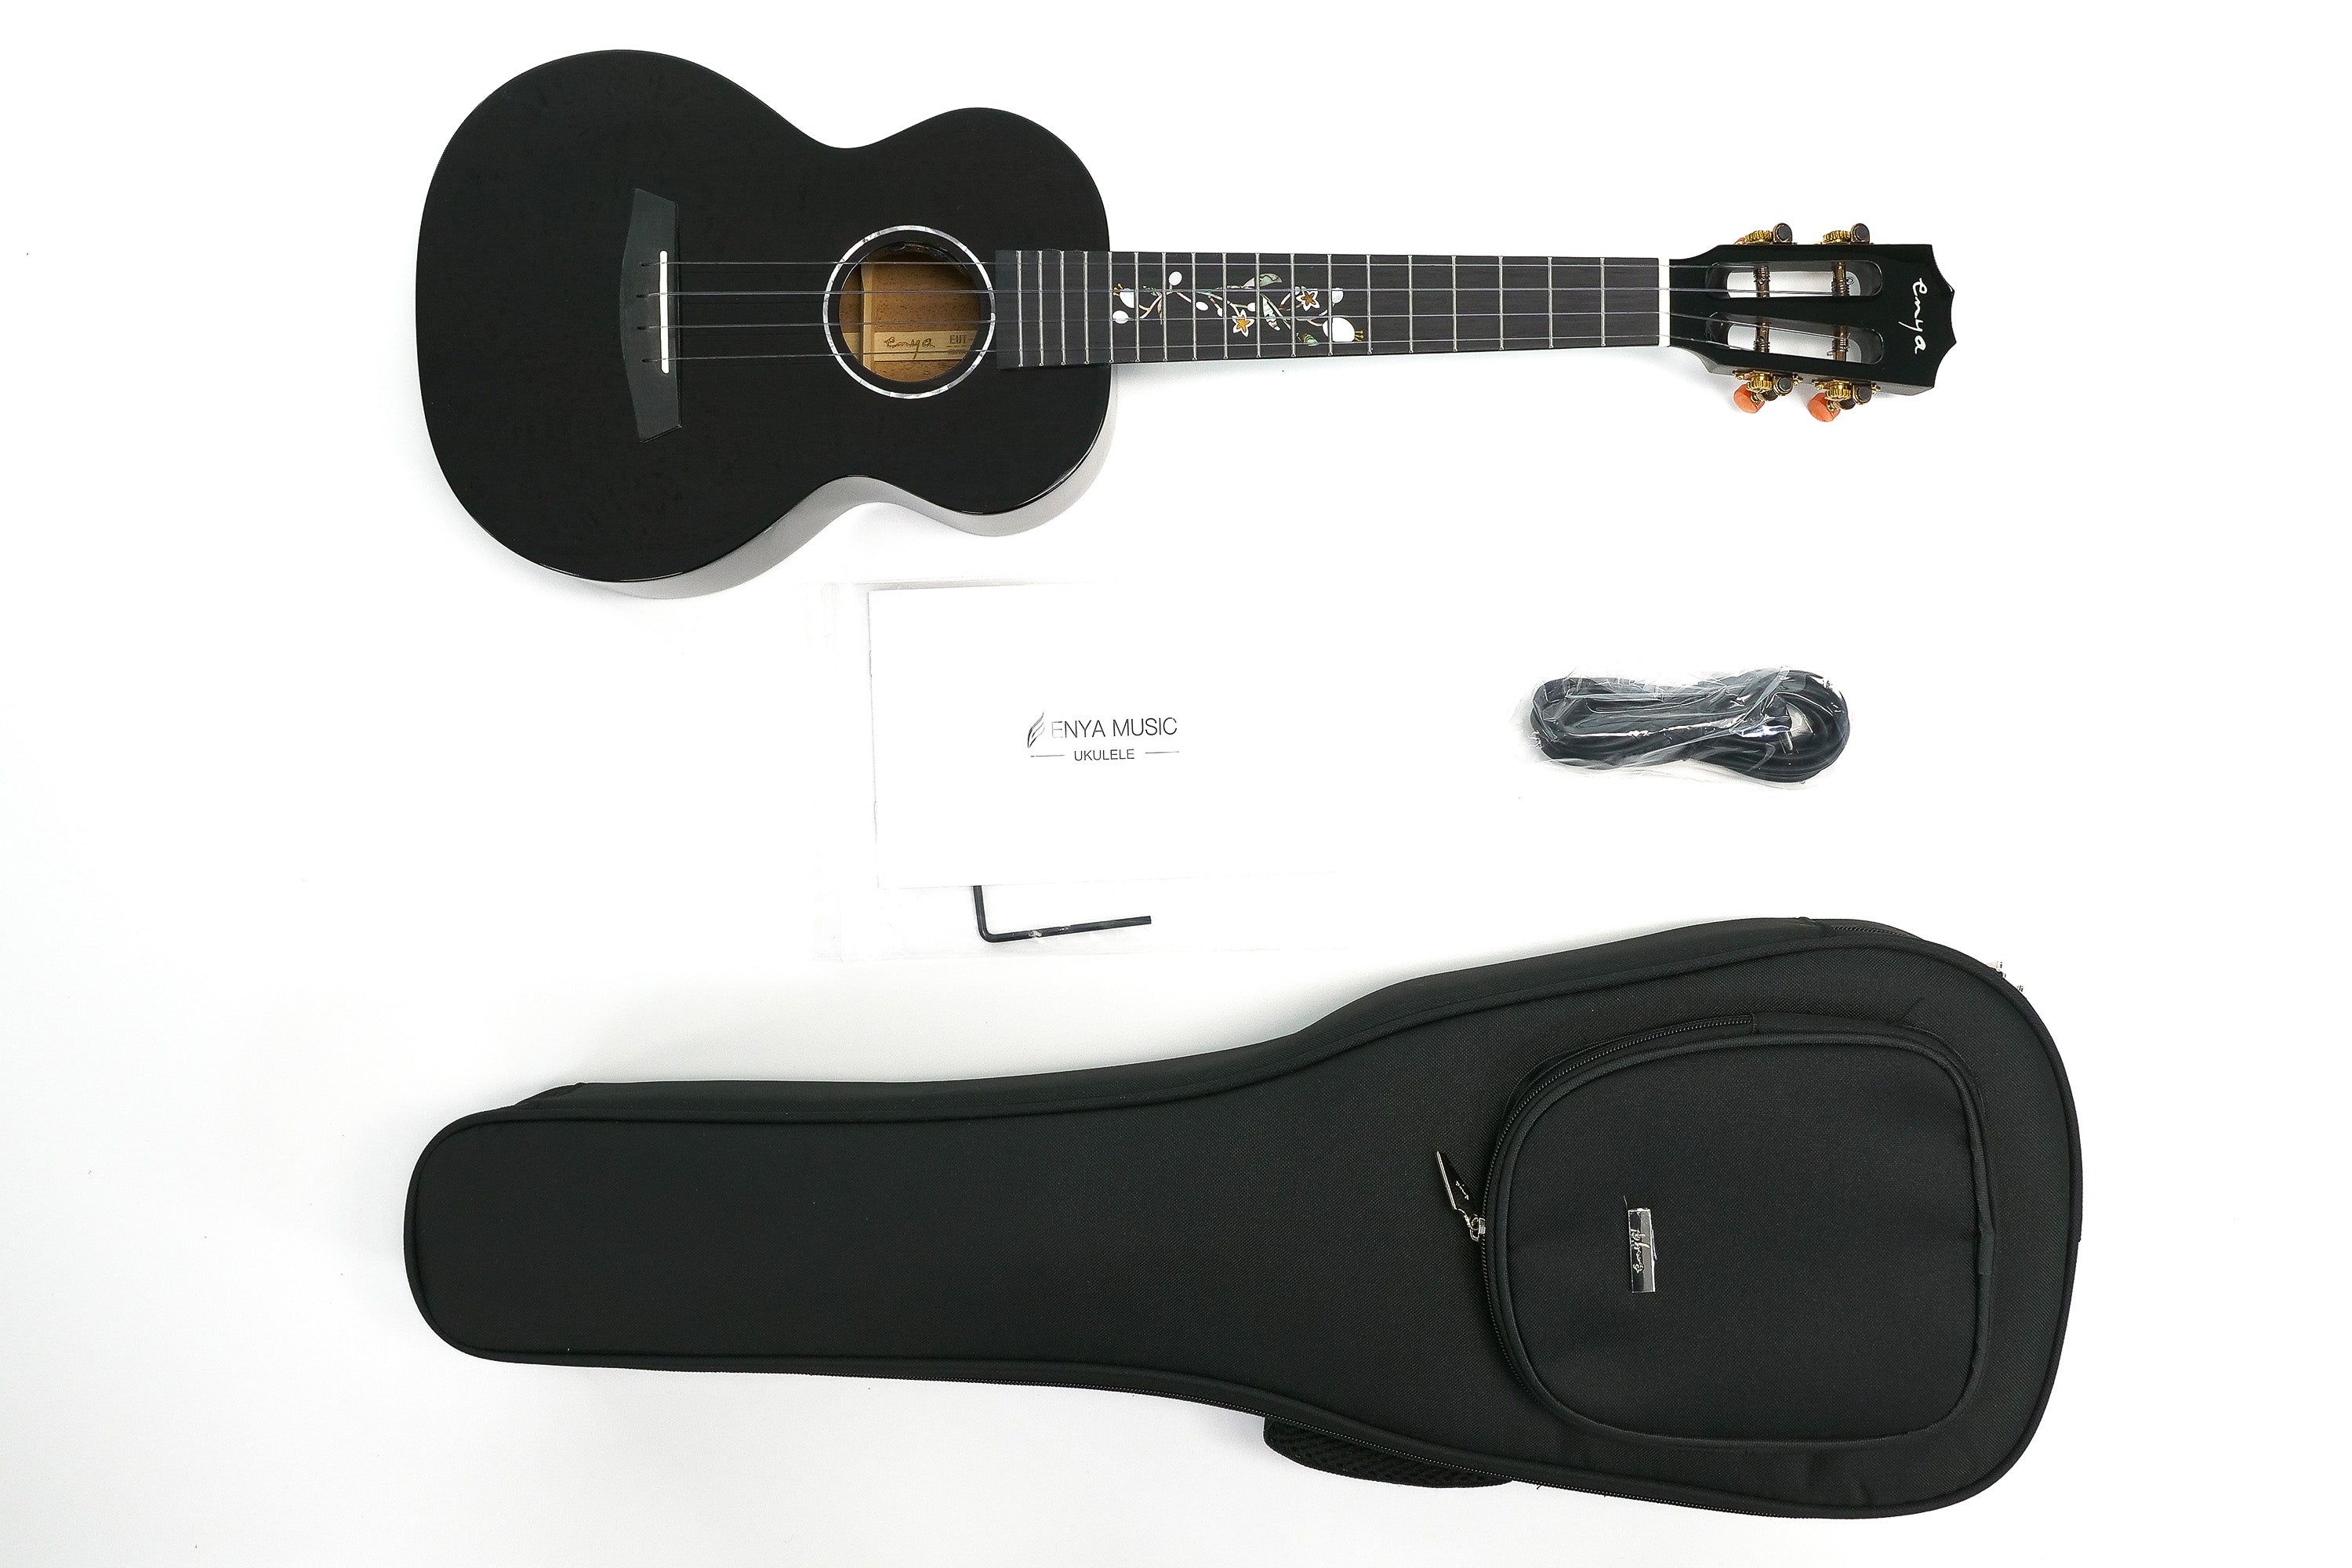 Package with Enya Tenor, allen wrench, booklet, strap and ukulele case